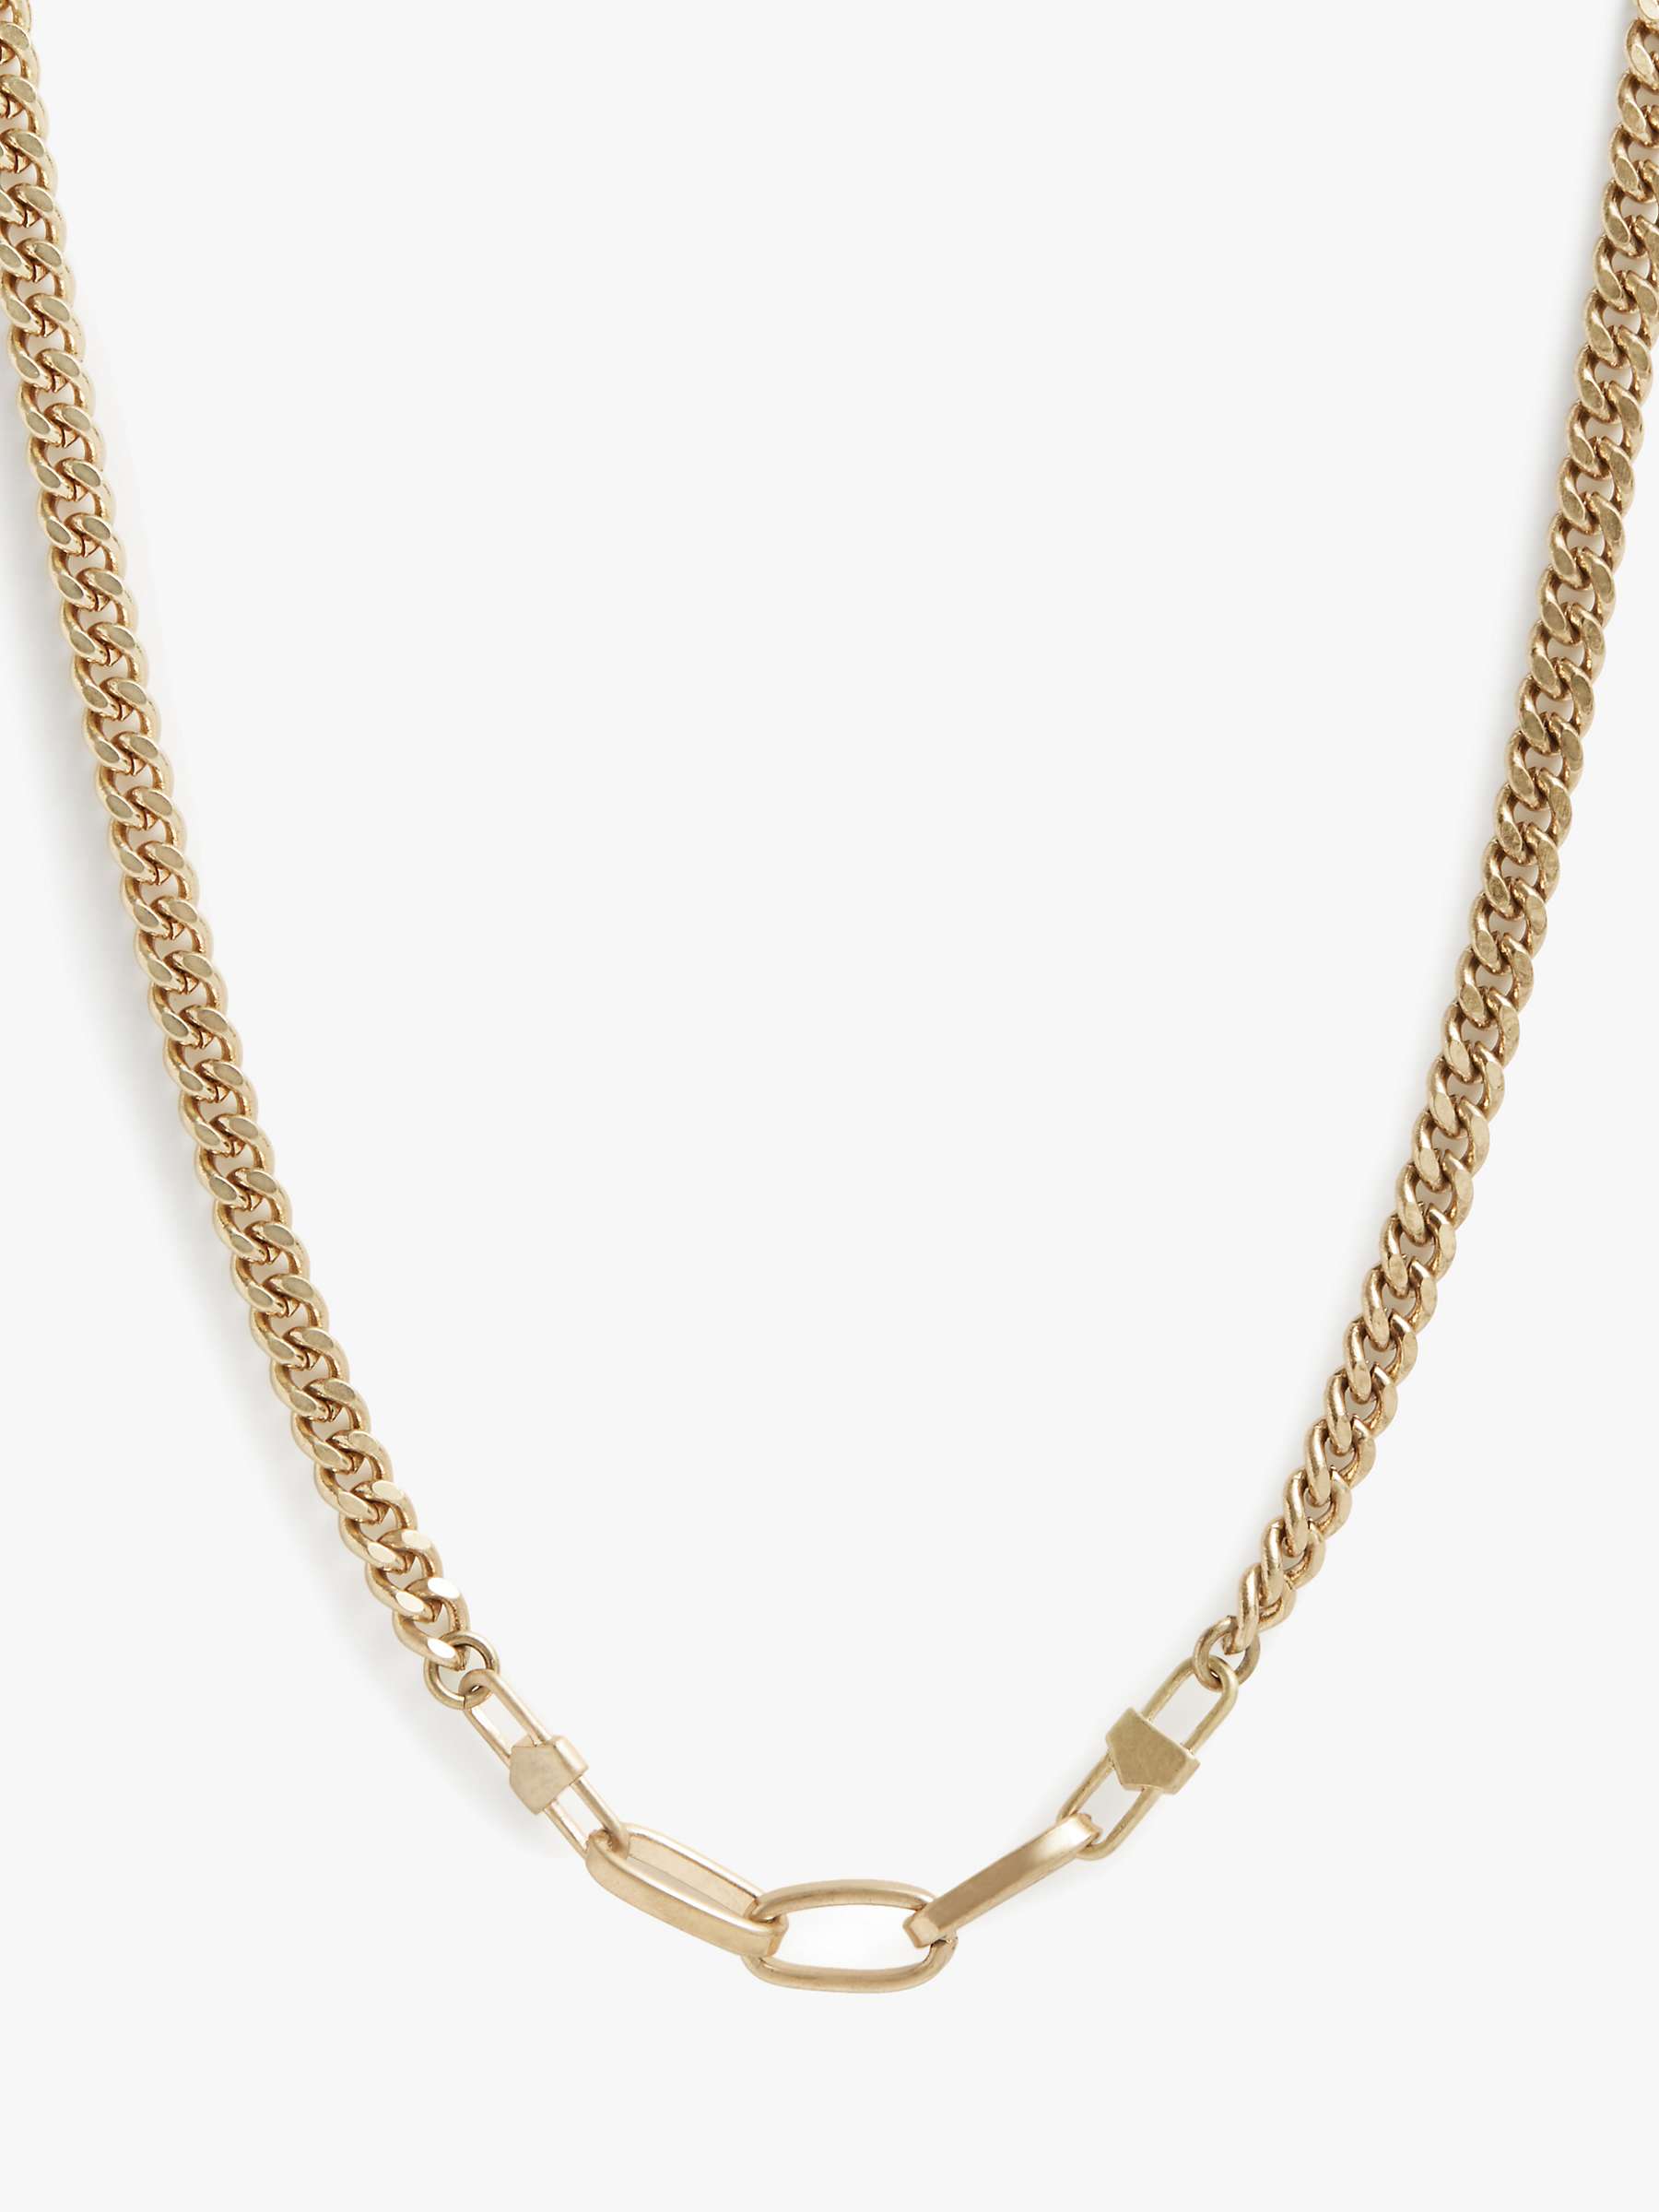 Buy AllSaints Curb Chain Toggle Necklace, Warm Brass Online at johnlewis.com